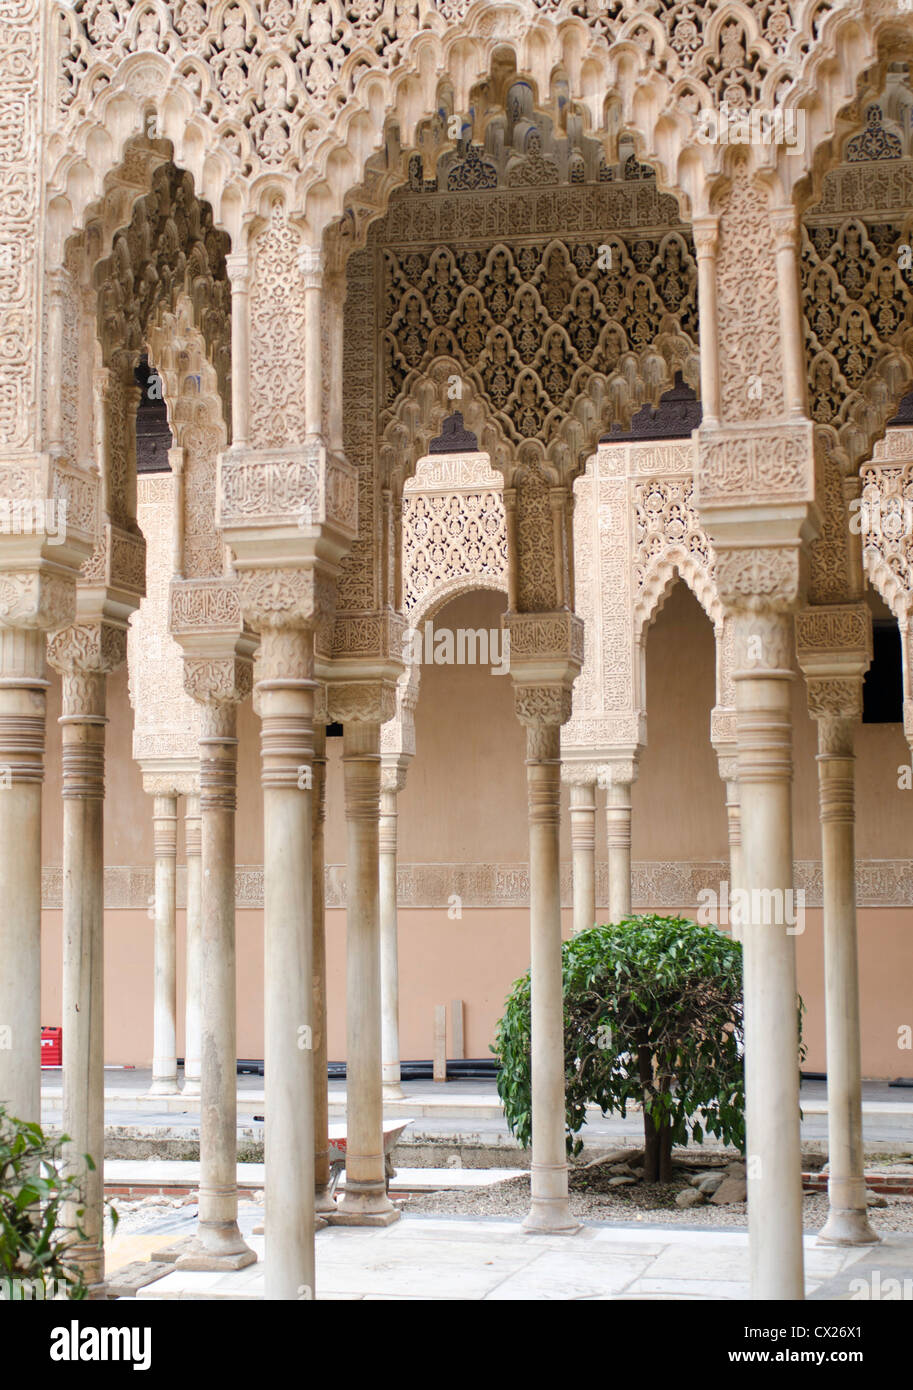 A Court Yard  with carved stone pillars in the Alhambra Palace Stock Photo